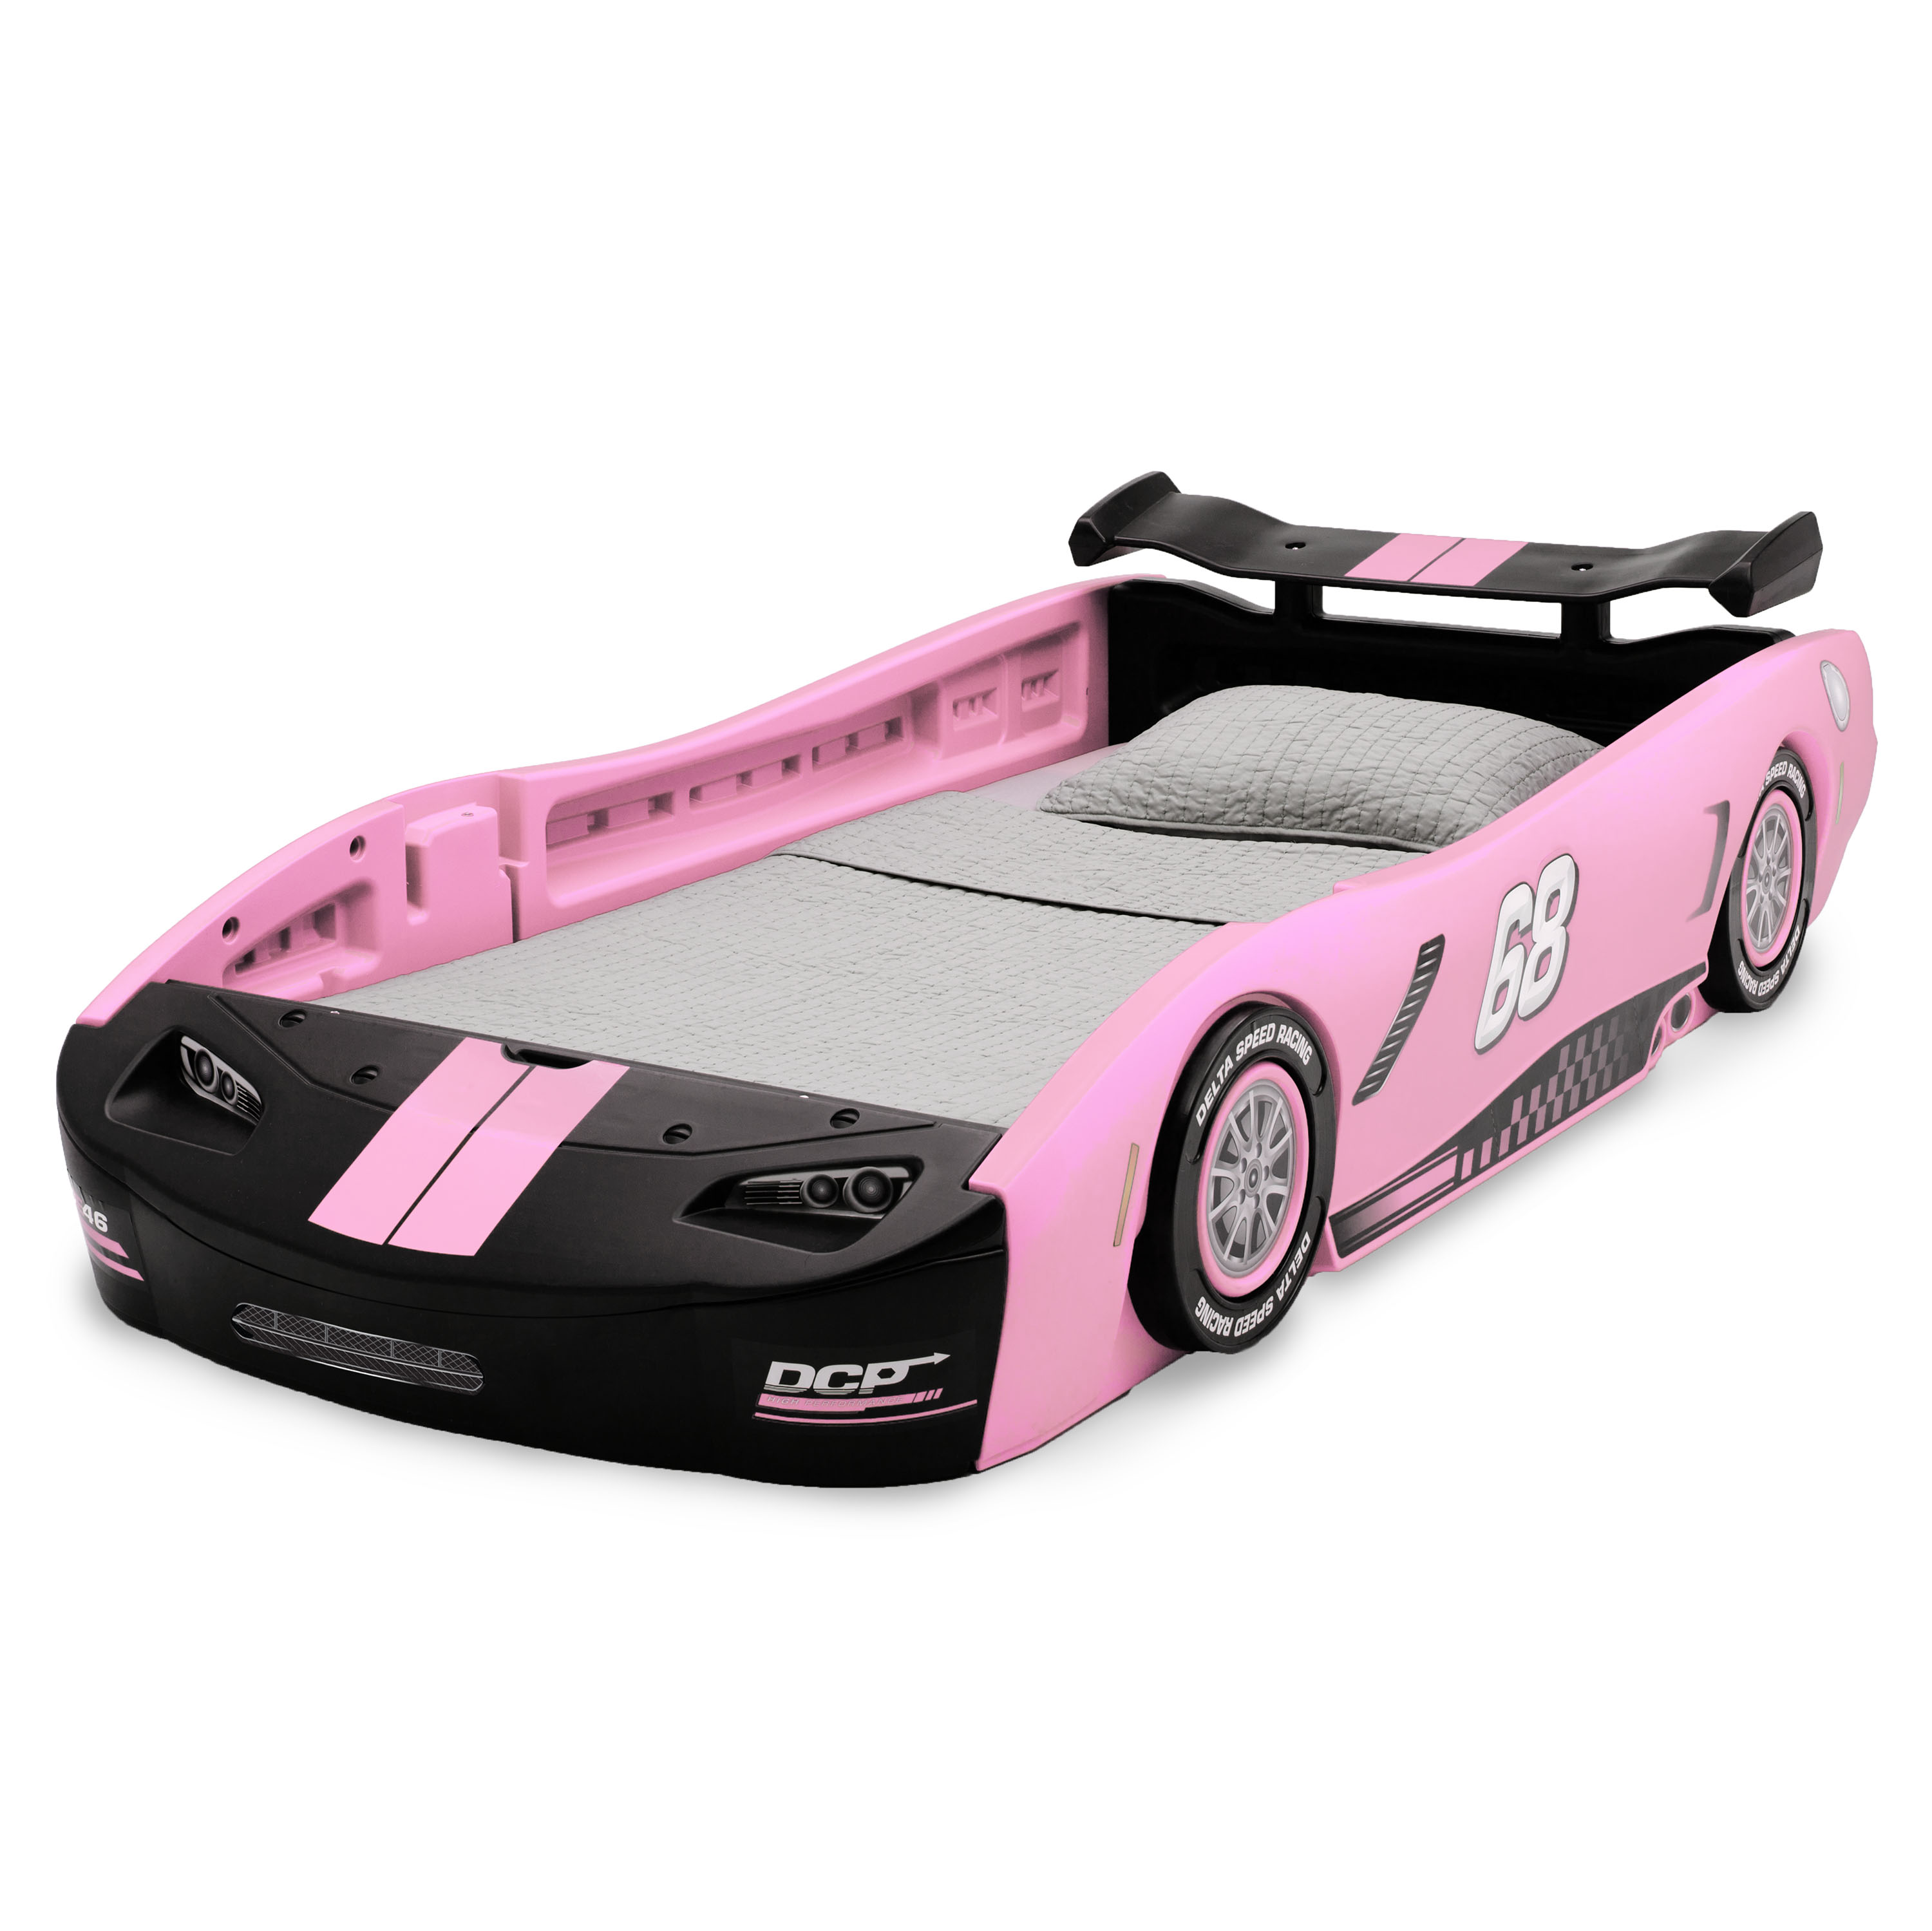 Delta Children Turbo Race Car Twin Bed, Pink - image 4 of 8